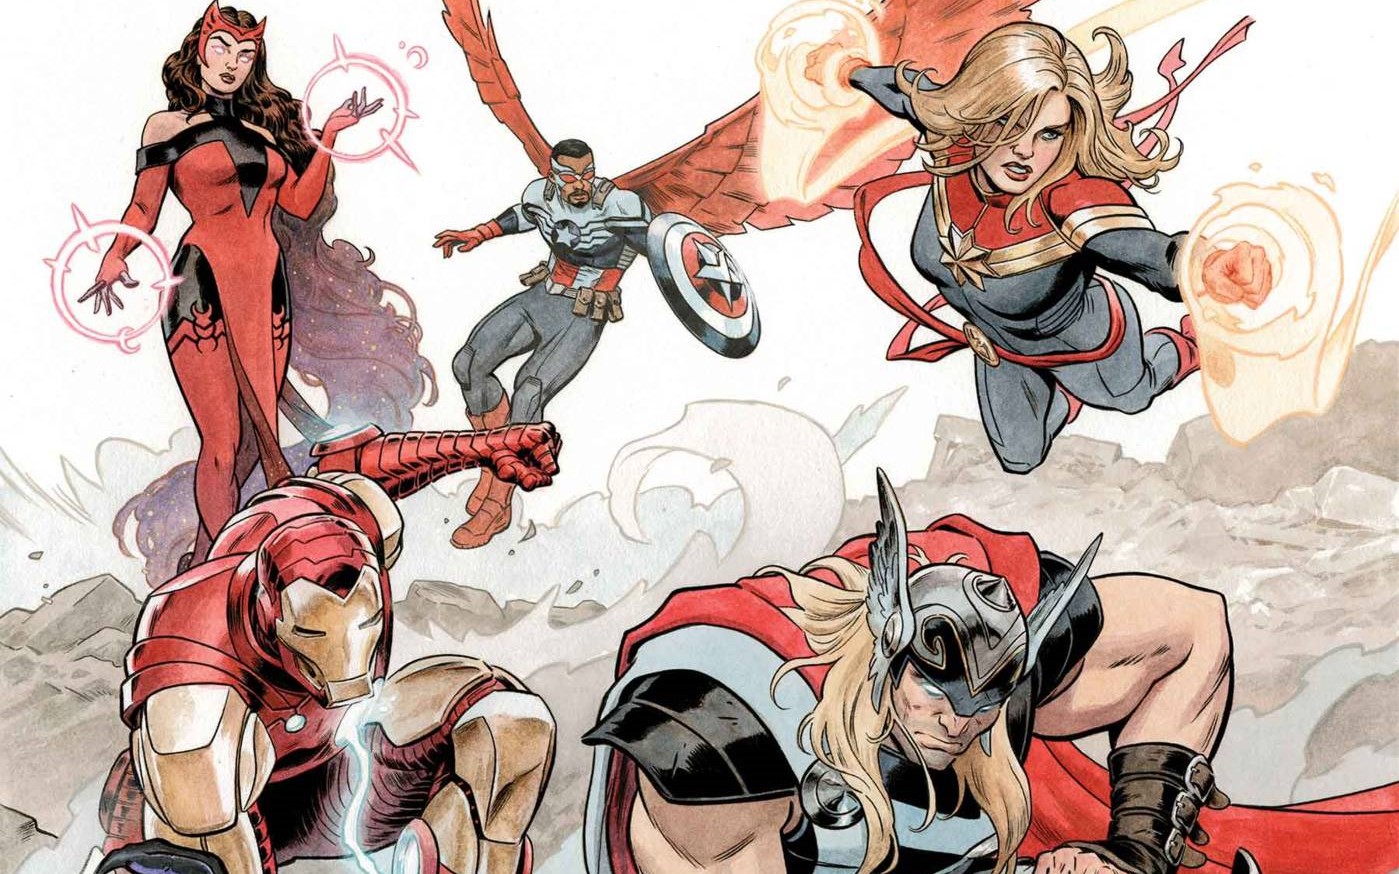 Marvel's Avengers review: A superpowered adventure with super